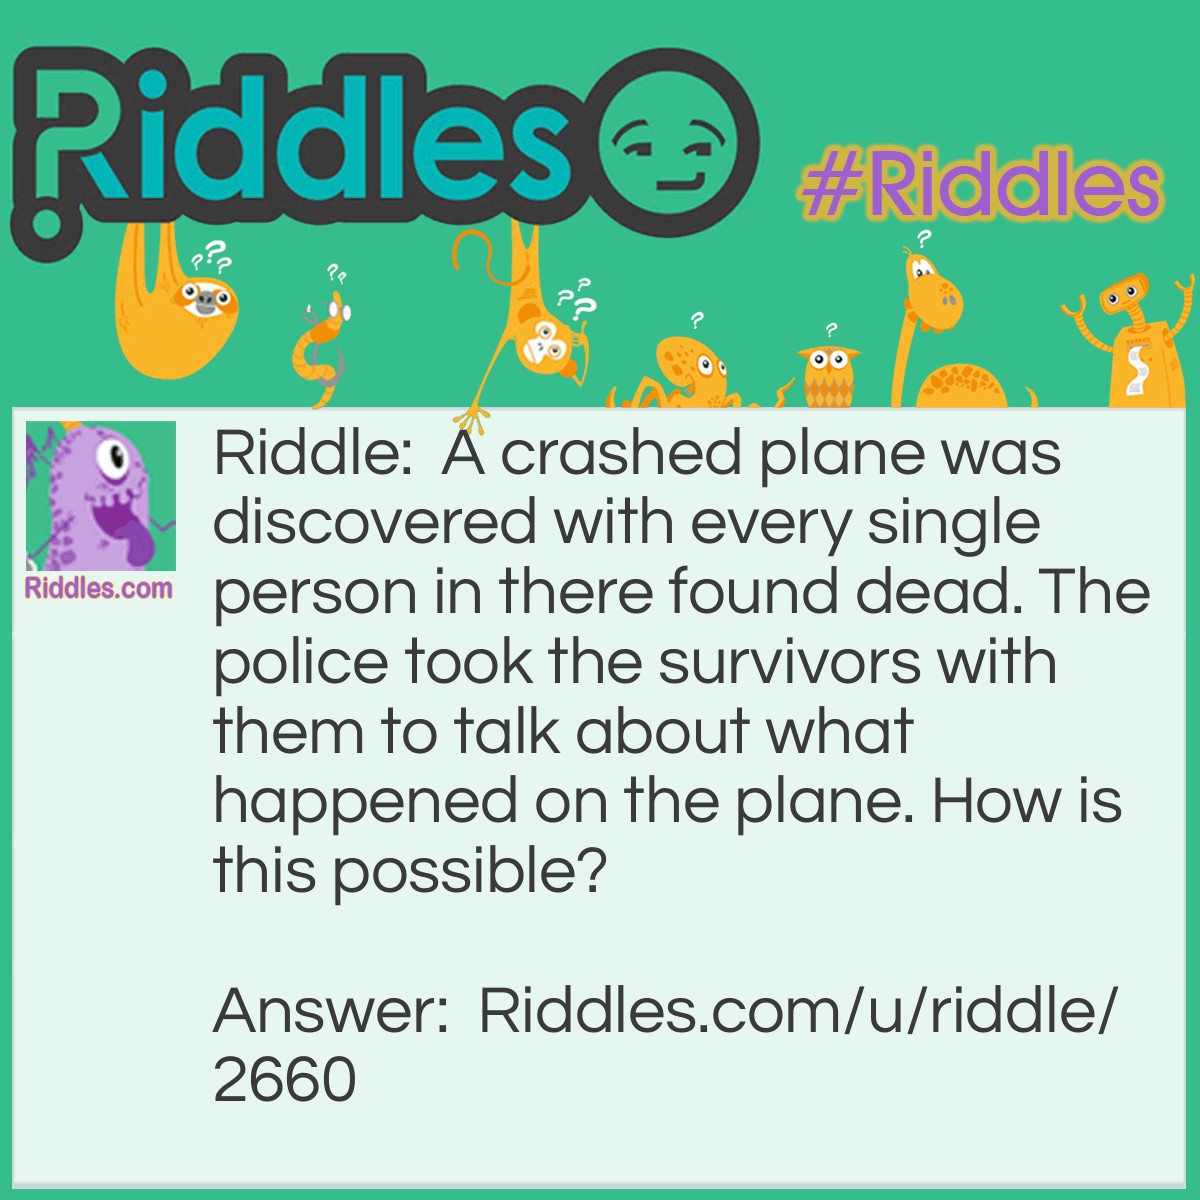 Riddle: A crashed plane was discovered with every single person in there found dead. The police took the survivors with them to talk about what happened on the plane. How is this possible? Answer: Every single person died, but the married people survived.